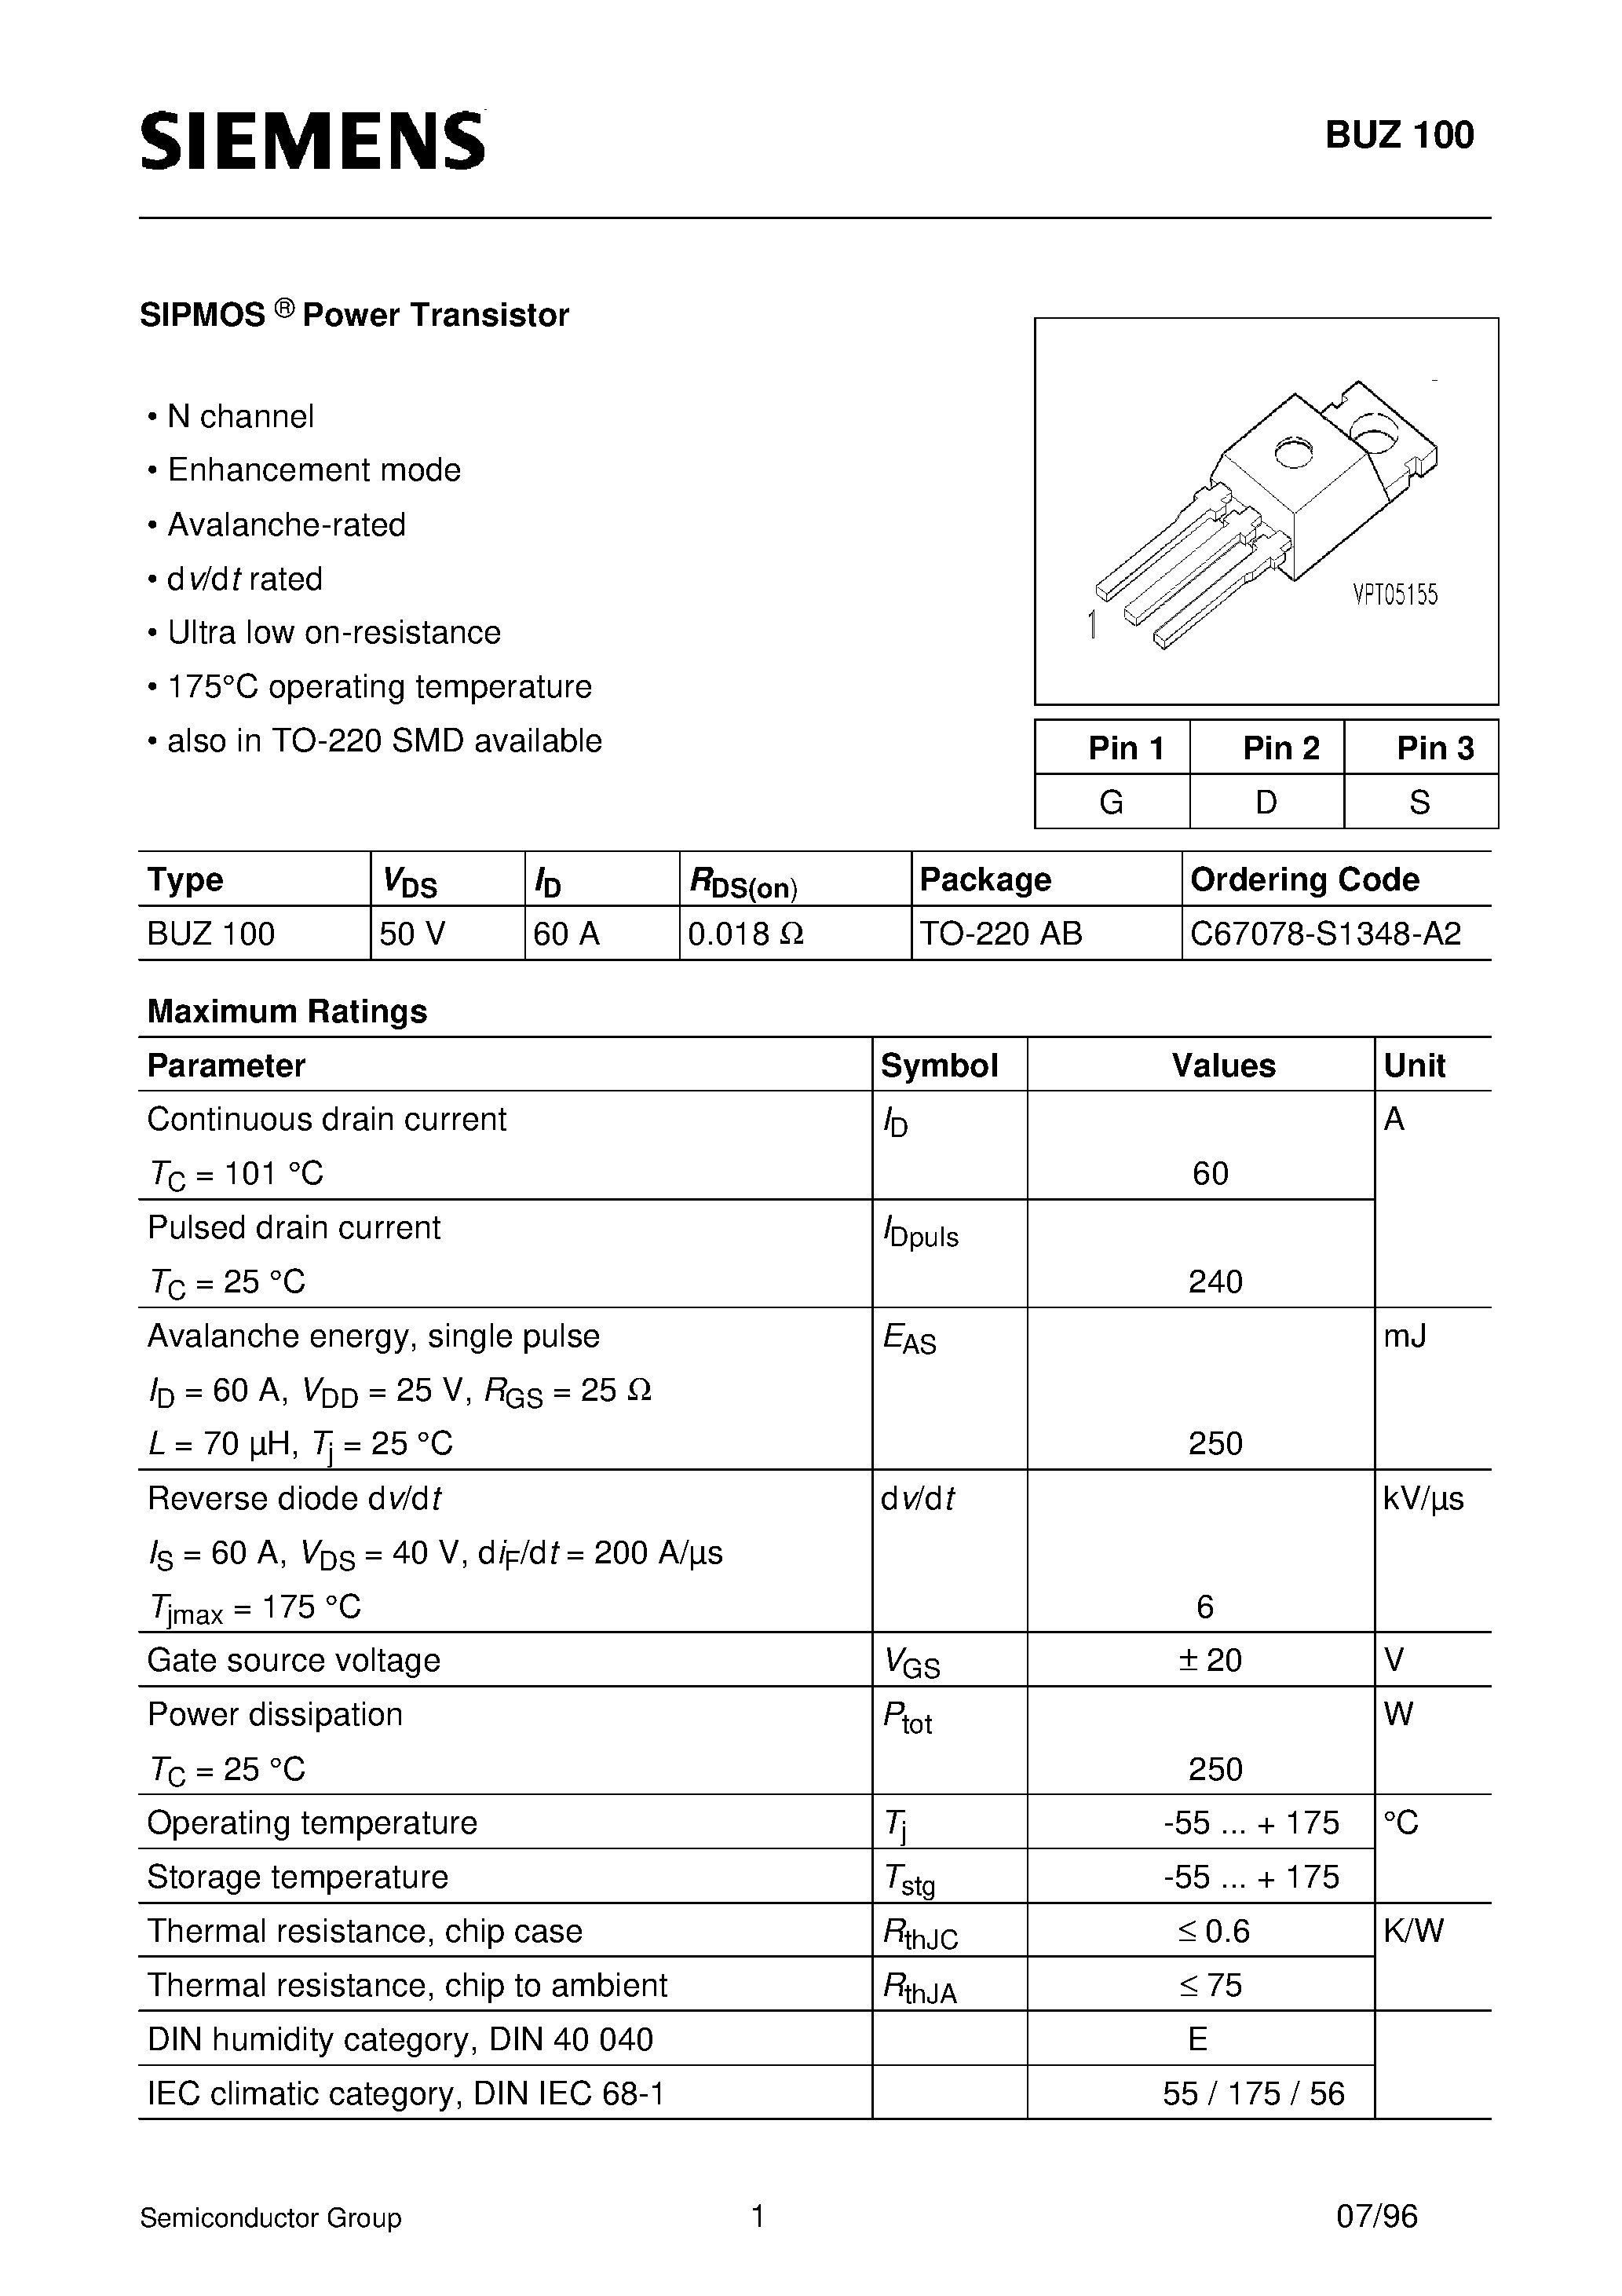 Datasheet BUZ100 - SIPMOS Power Transistor (N channel Enhancement mode Avalanche-rated d v/d t rated) page 1